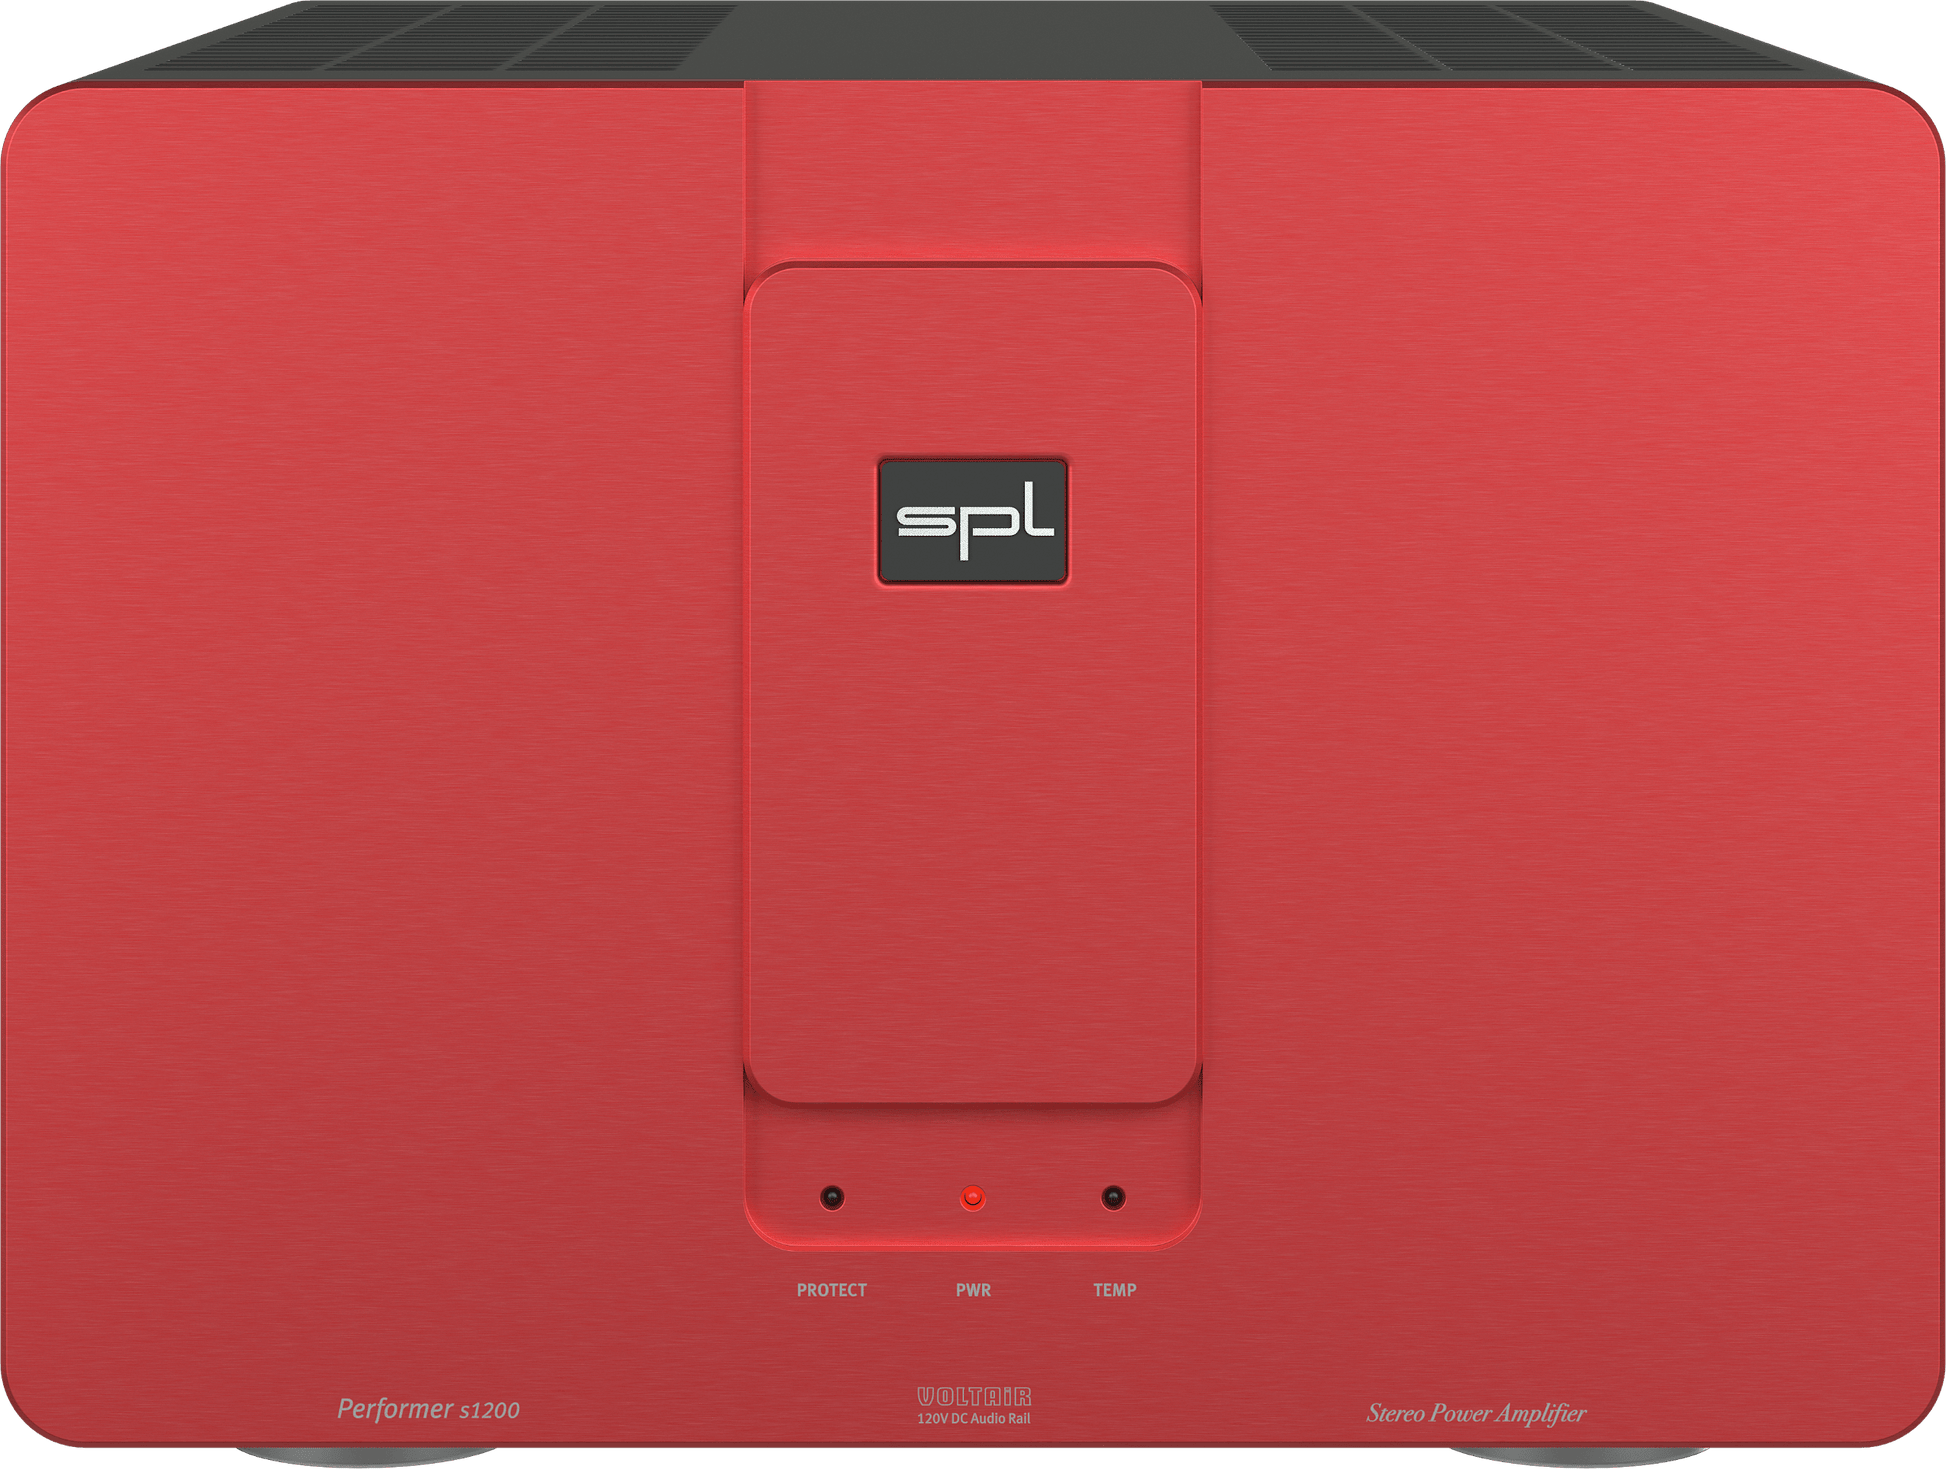 SPL Audio Performer s1200 Stereo Power Amplifier in red with red insert